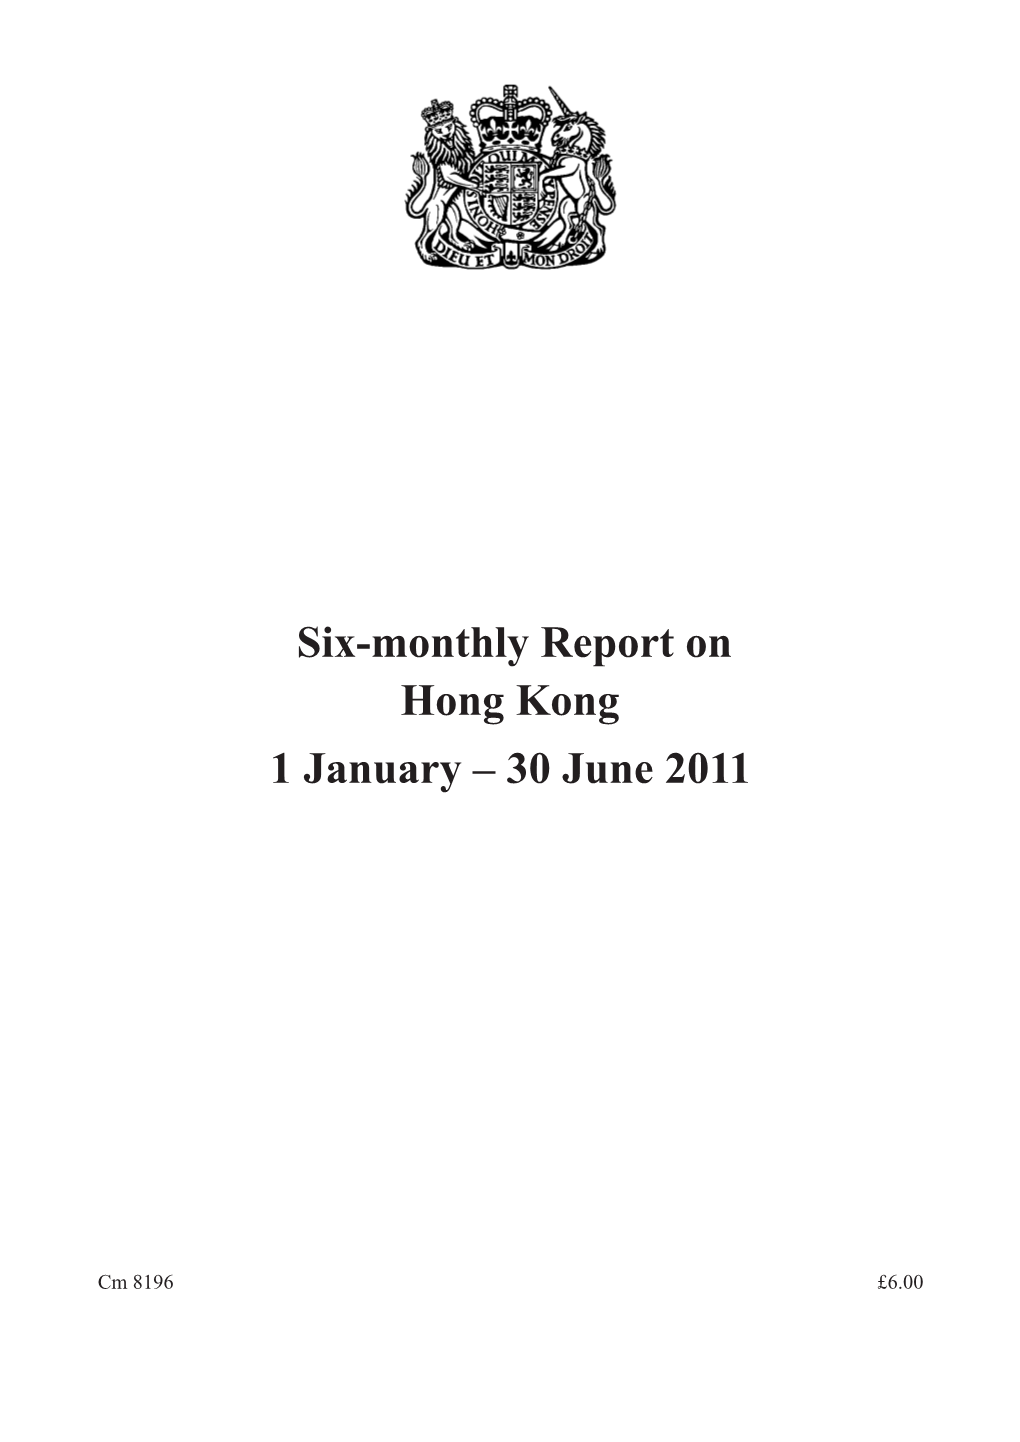 Six-Monthly Report on Hong Kong 1 January Â